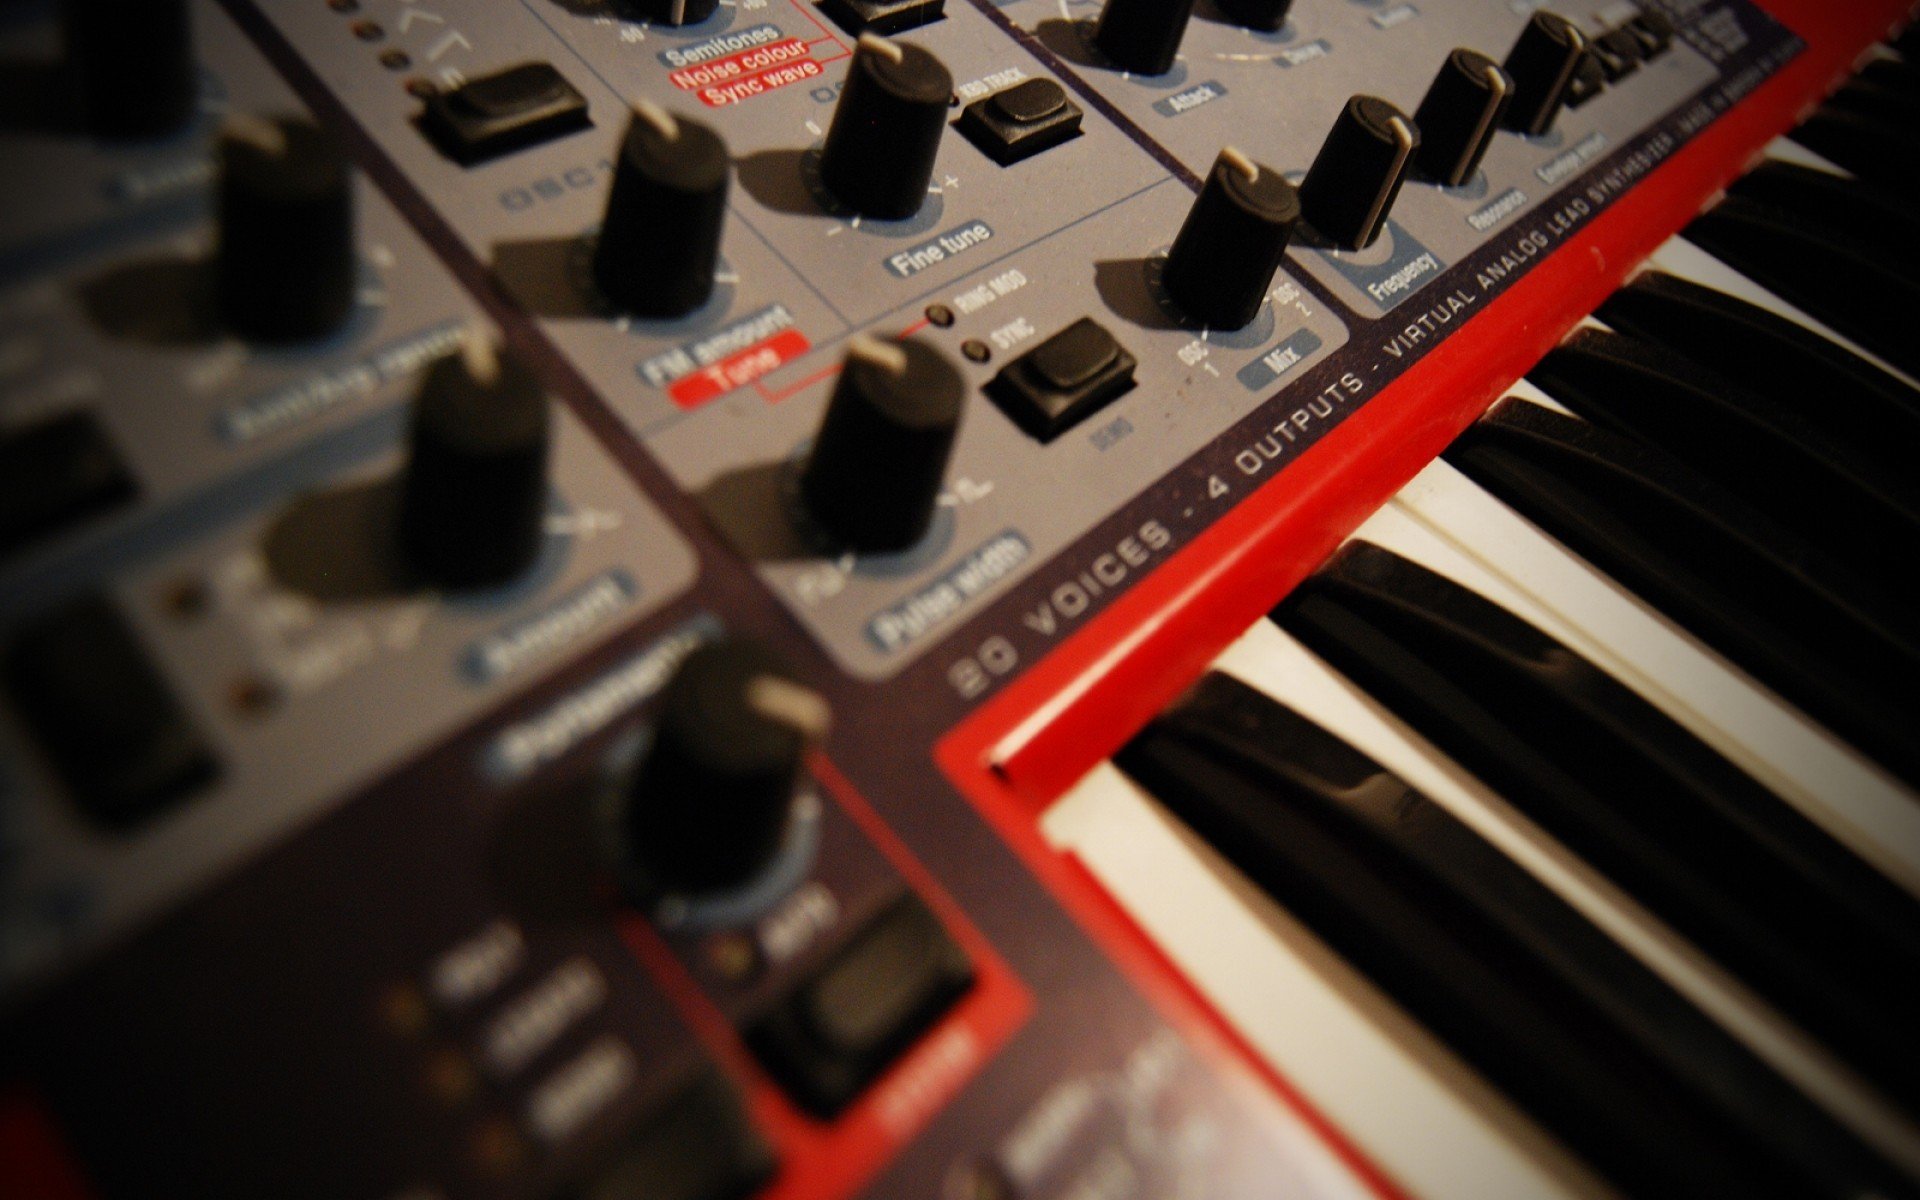 sound, Mixing consoles, Techno, Consoles, Nord, Synthesizer Wallpaper